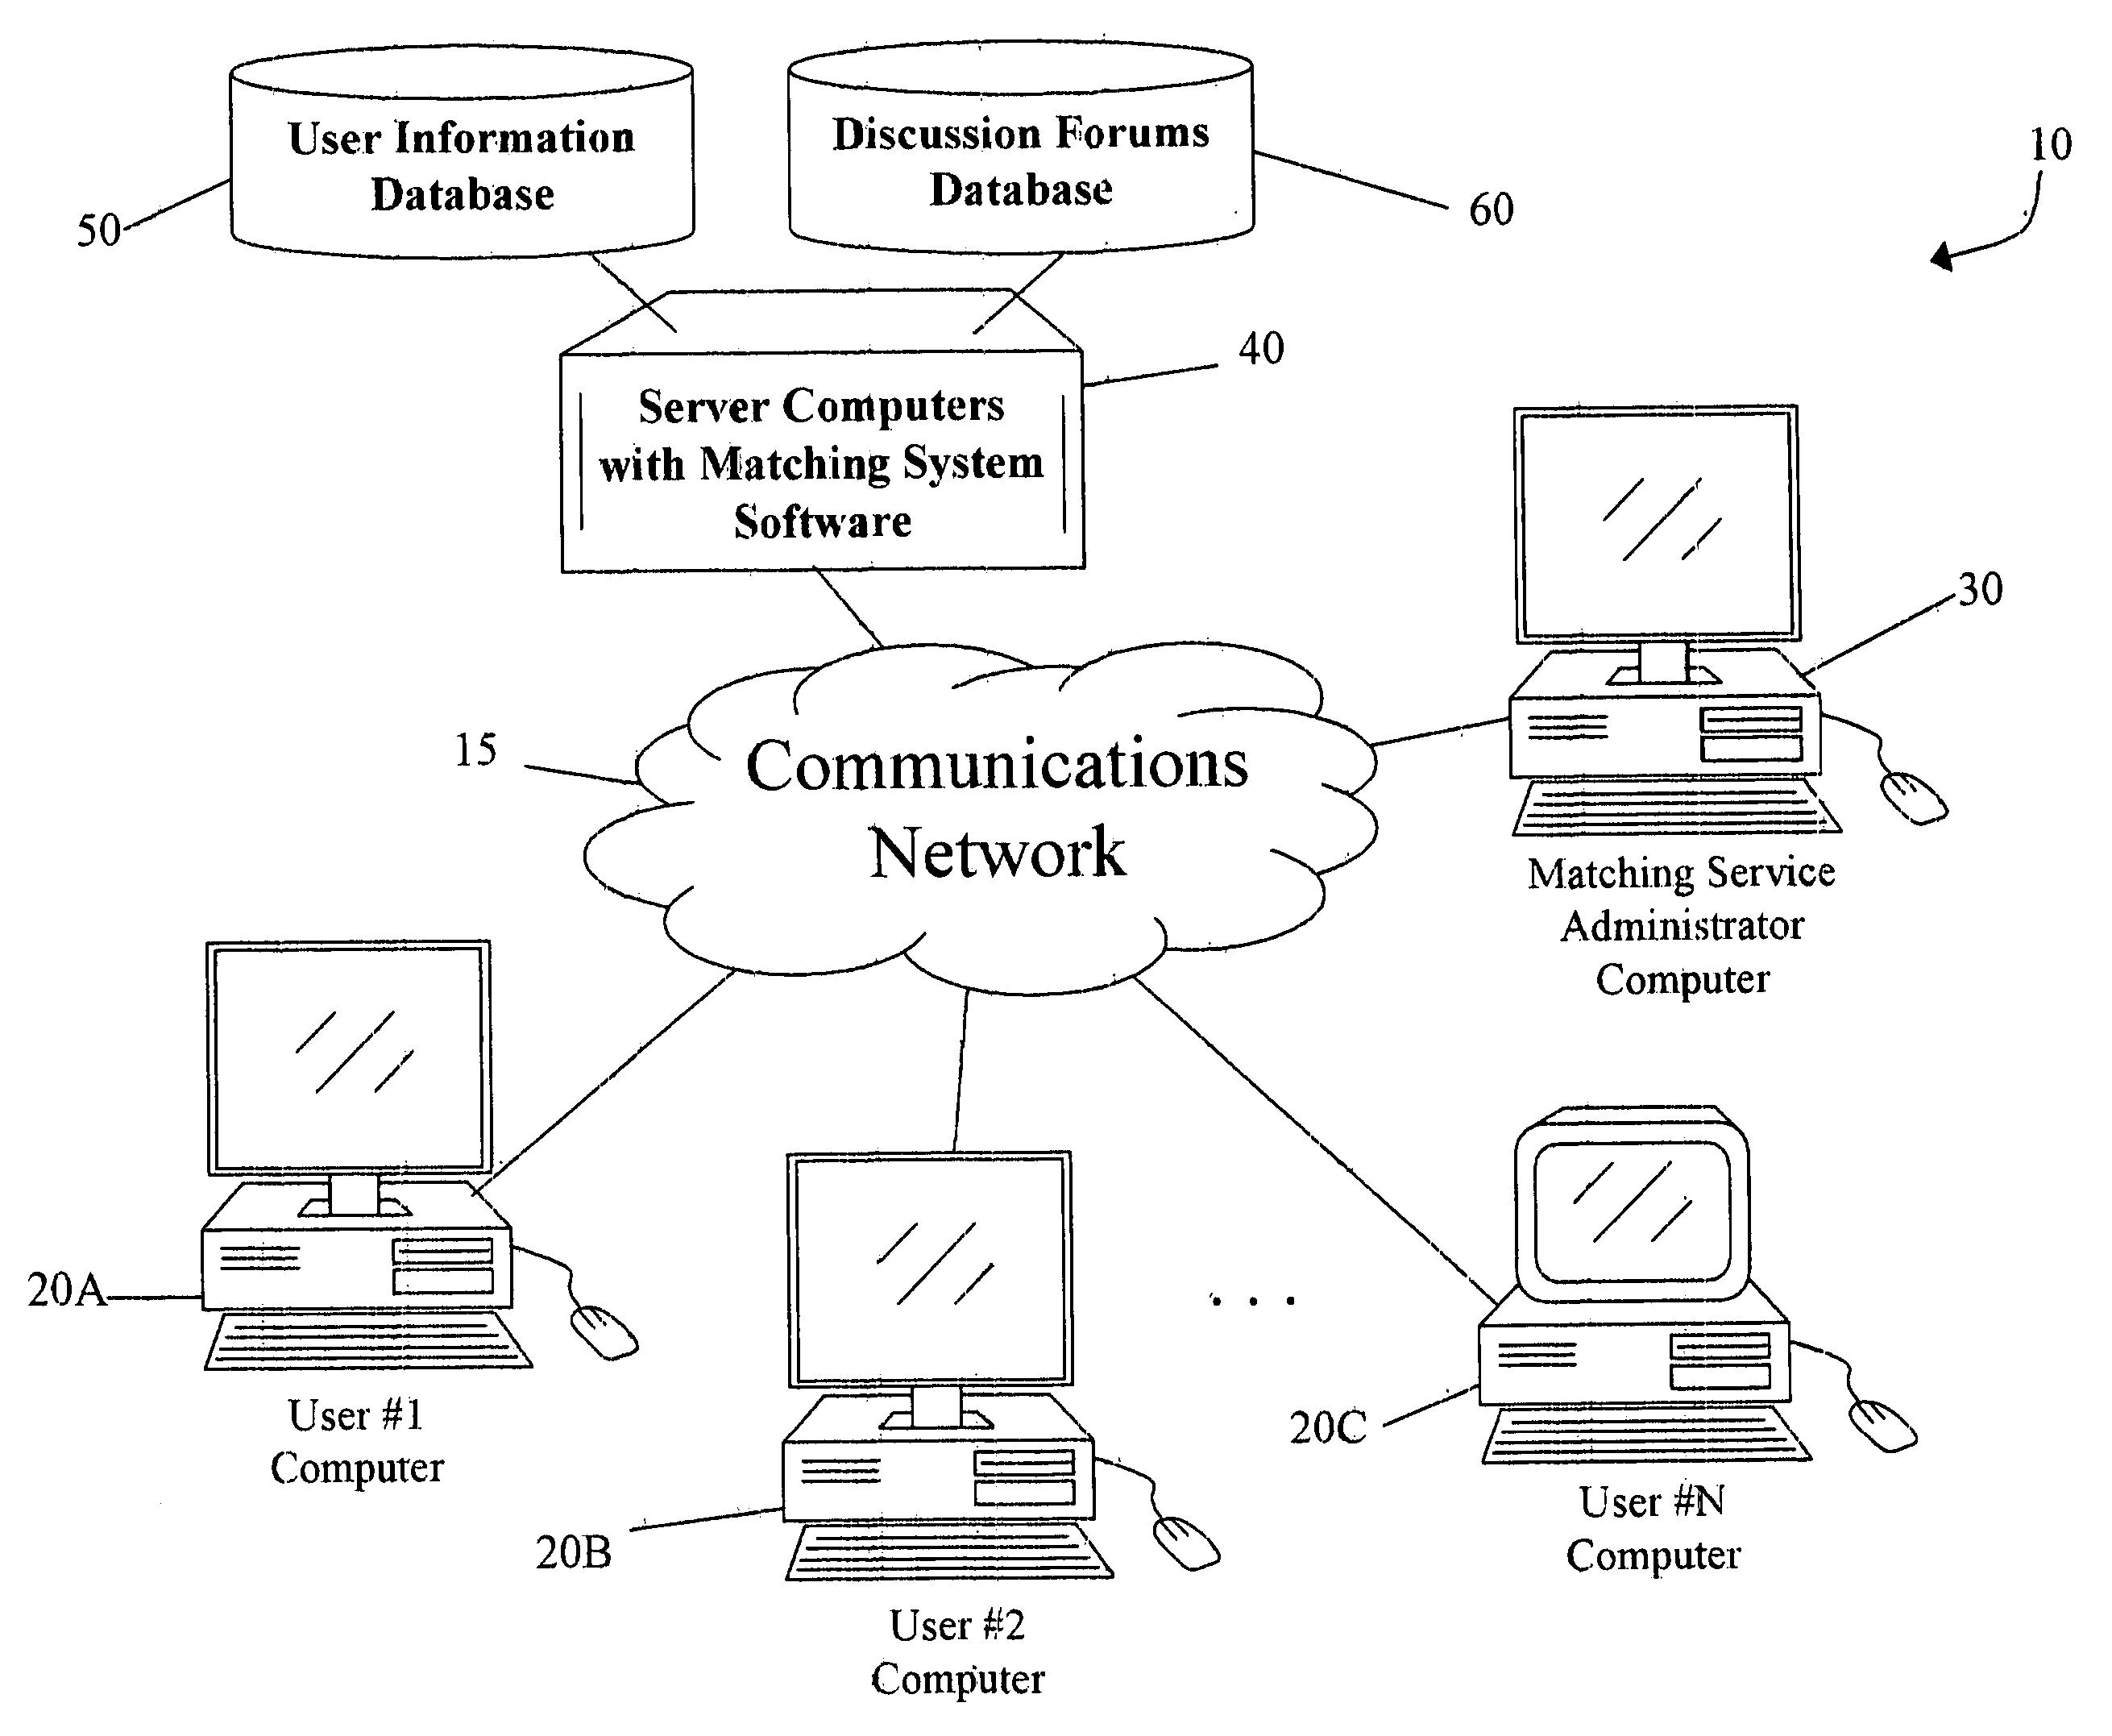 Method and system for matching users for relationships using a discussion based approach